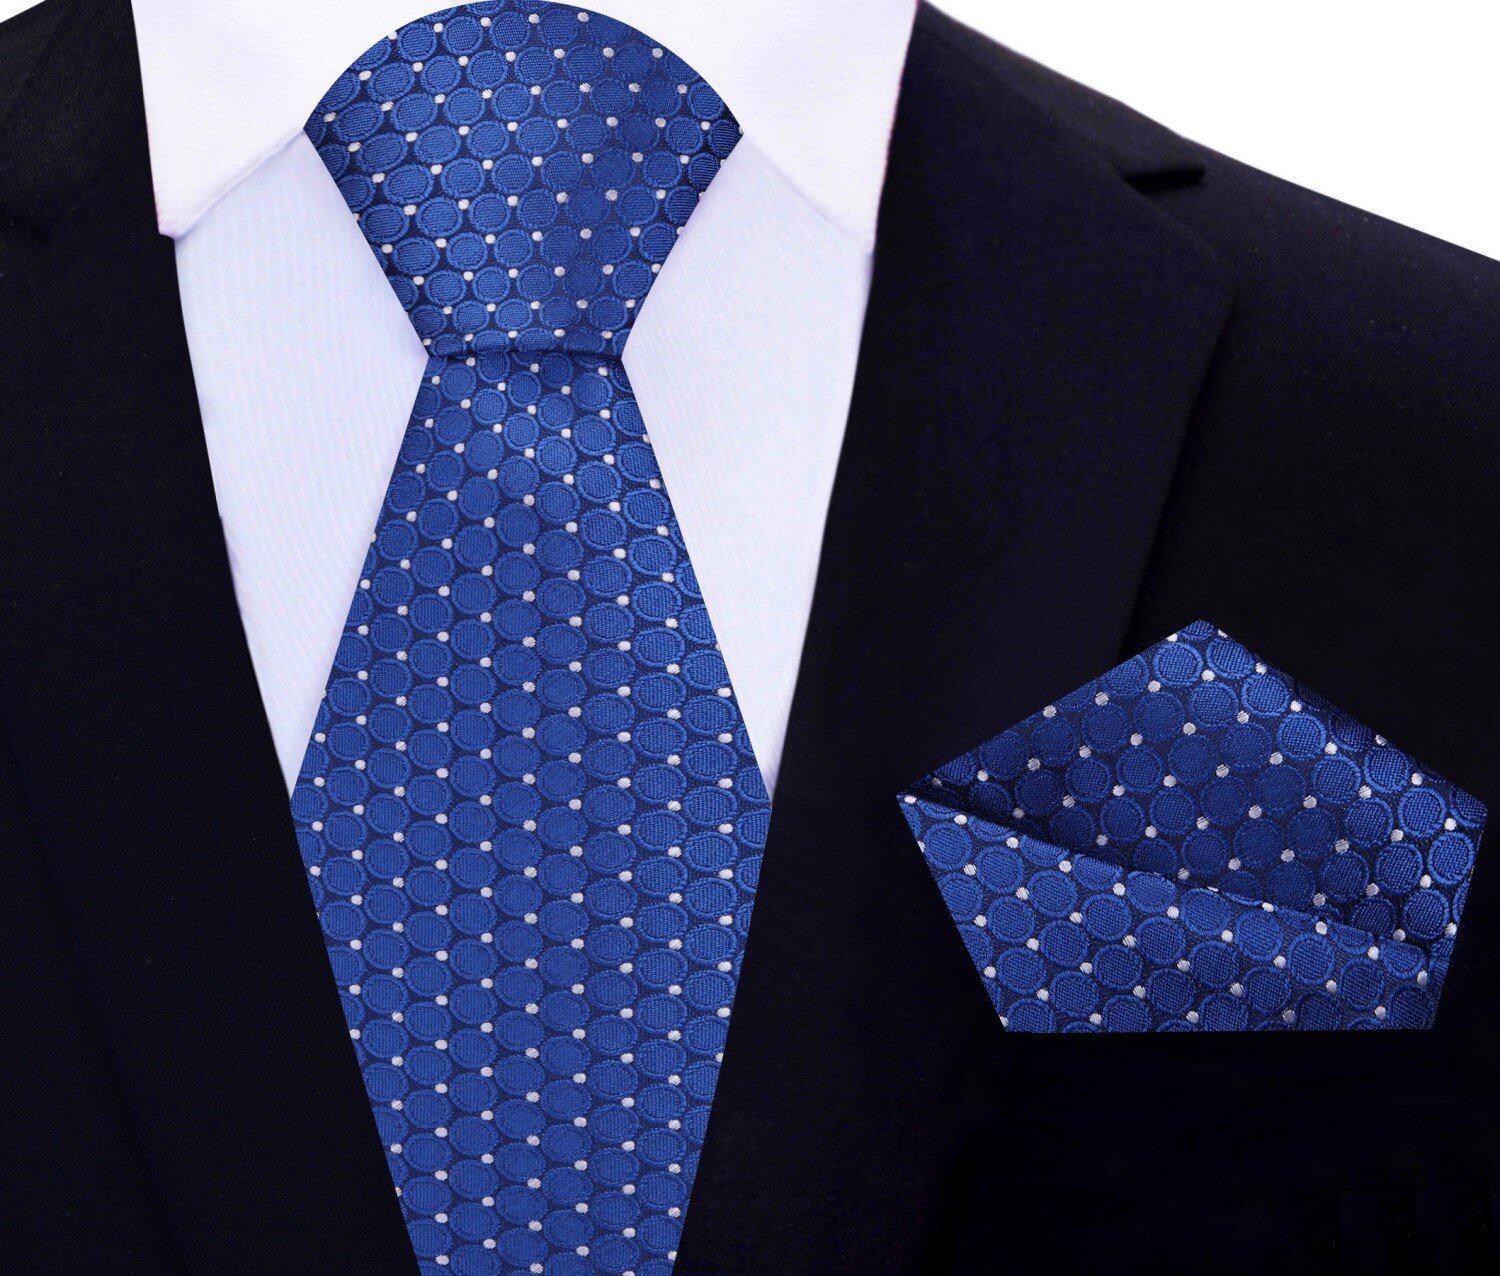 Main: Blue, White Circles Tie and Pocket Square